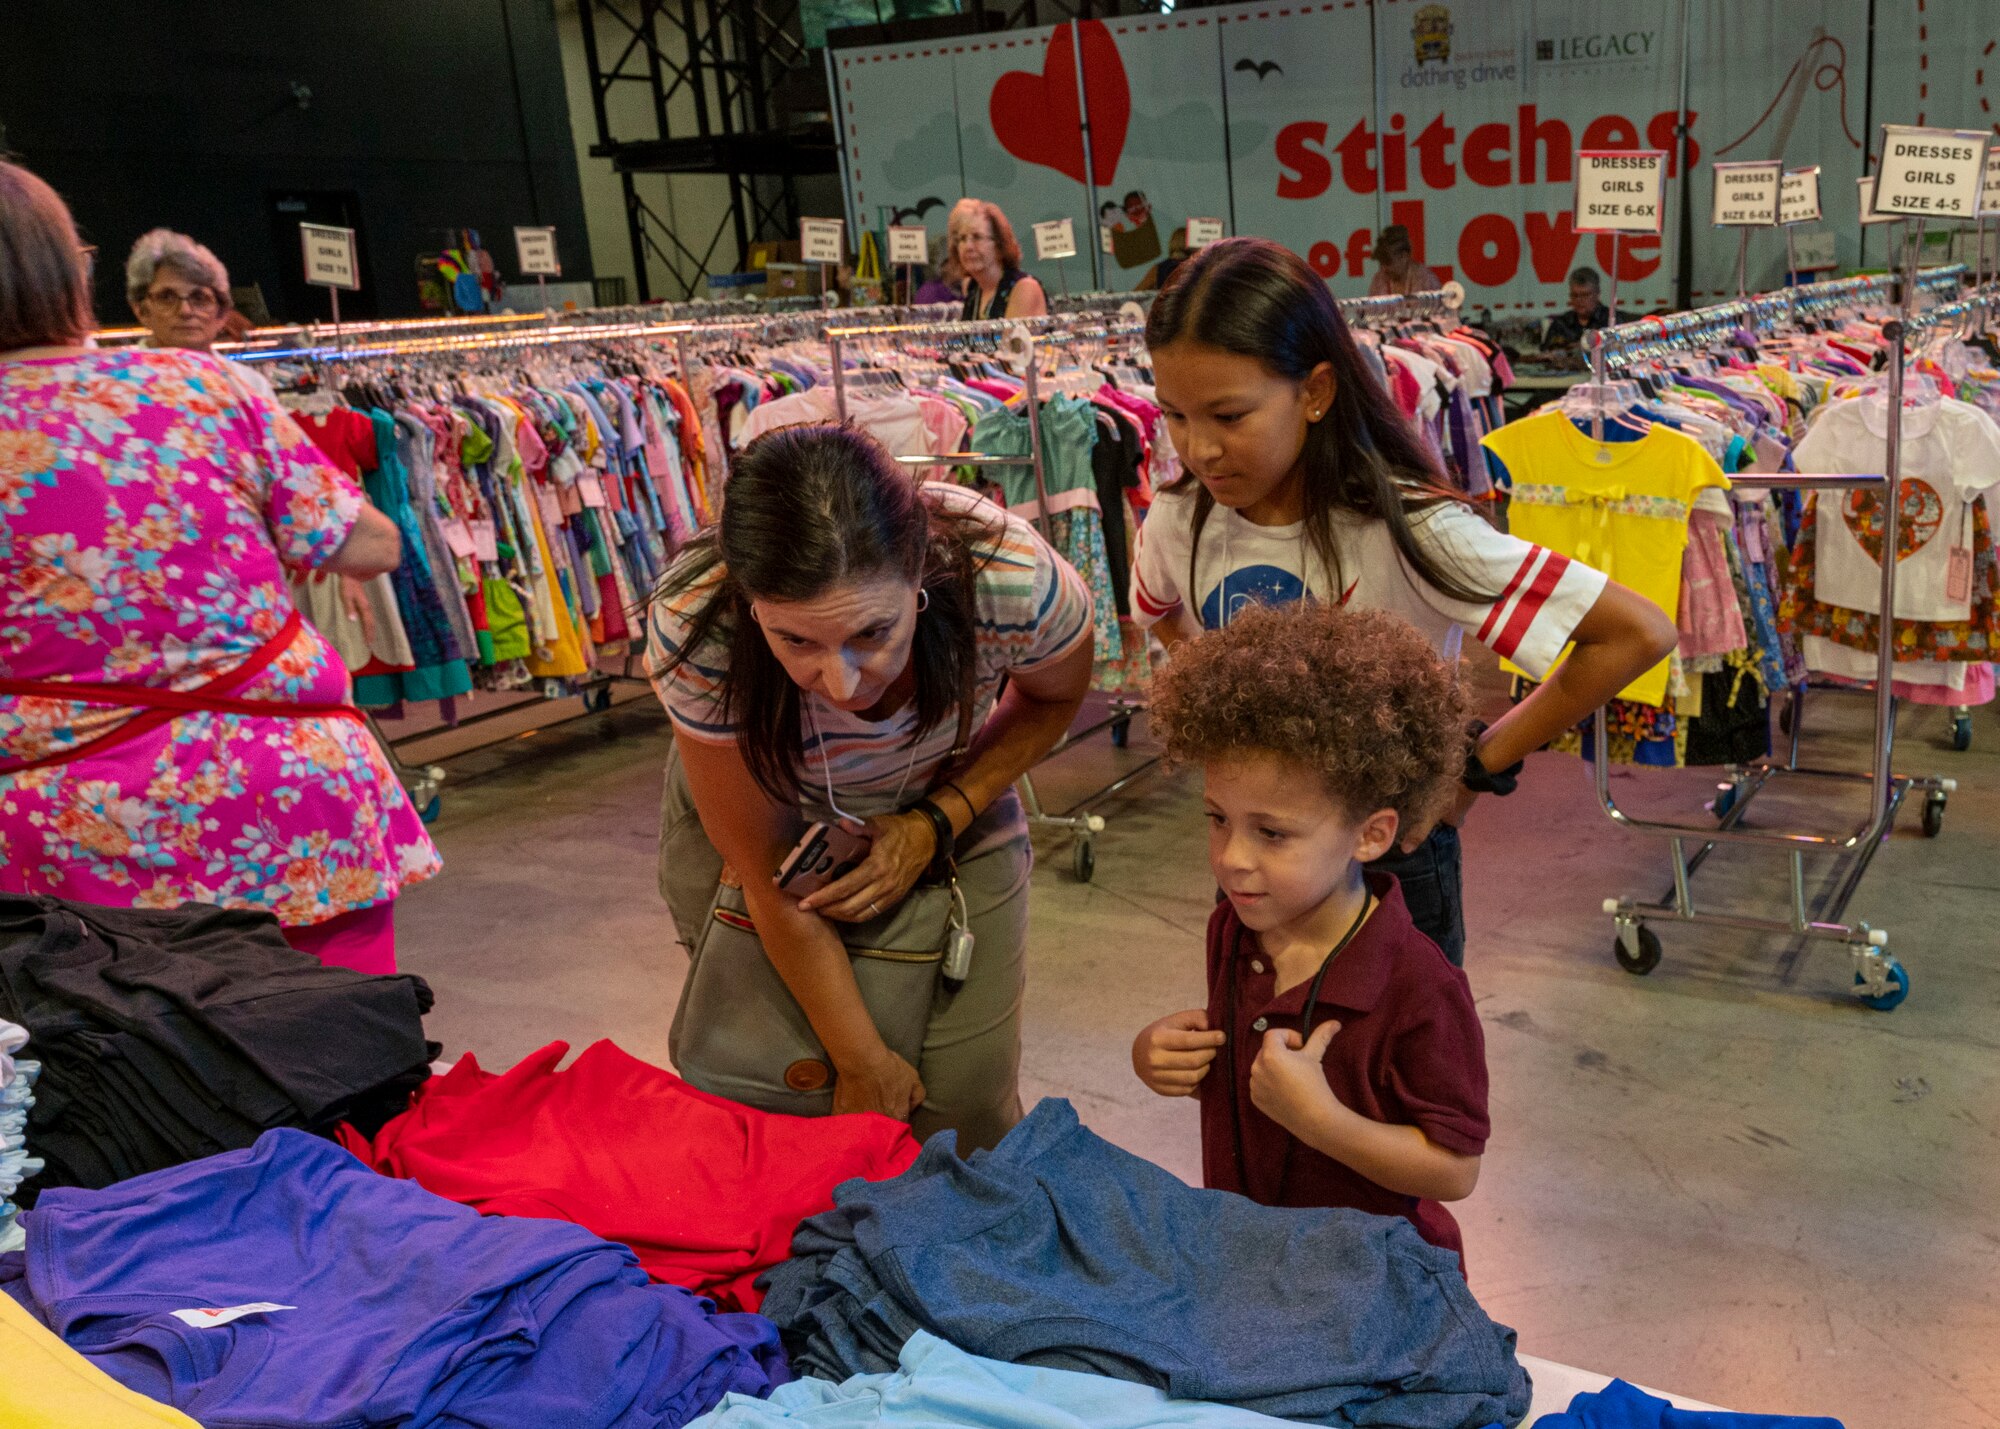 A volunteer helps two children pick out clothes from the “Stitches of Love” program at the Back to School Bash event July 20, 2022, at Grand Canyon University, Phoenix, Arizona.